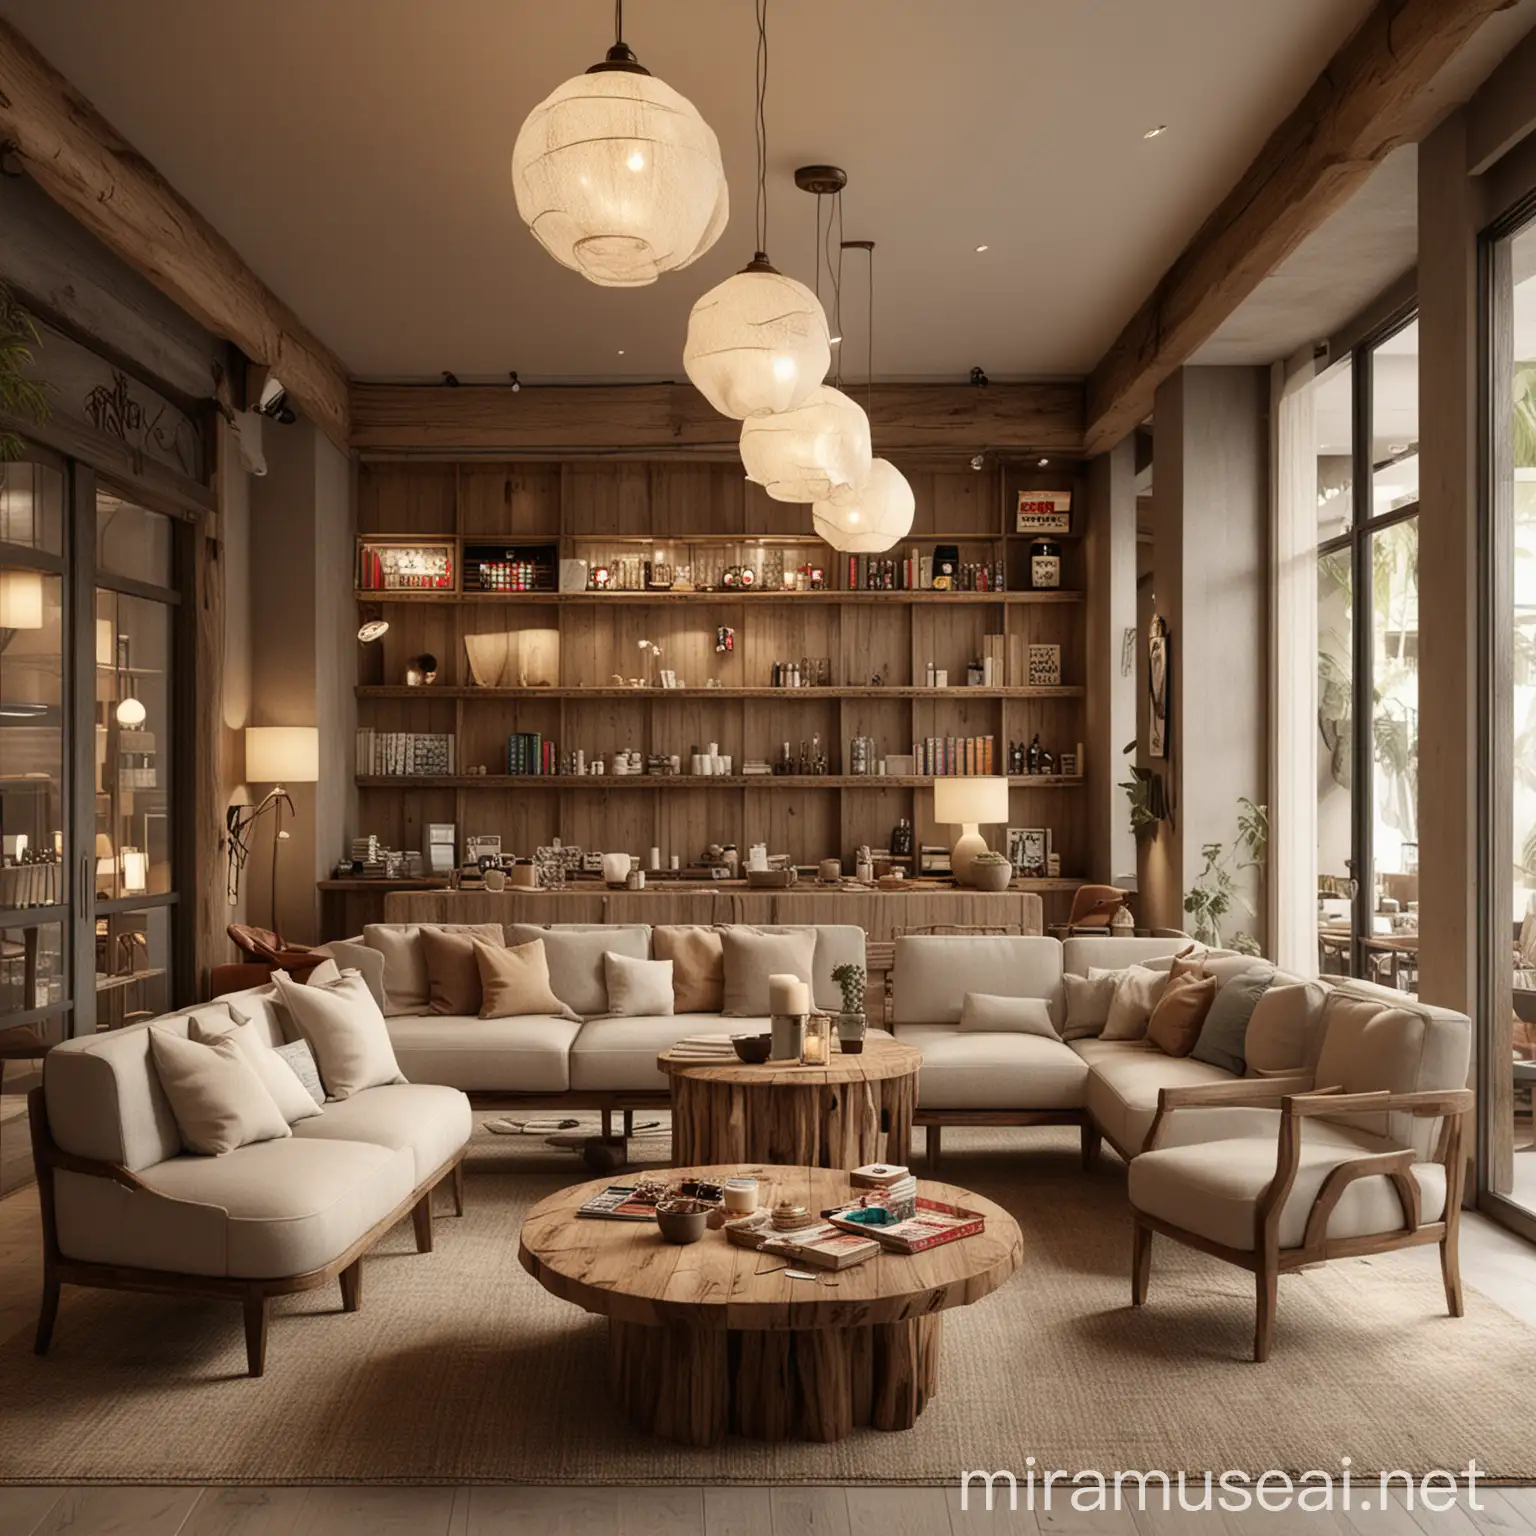 Vintage Chic Hotel Lobby with Cozy Seating and Board Games